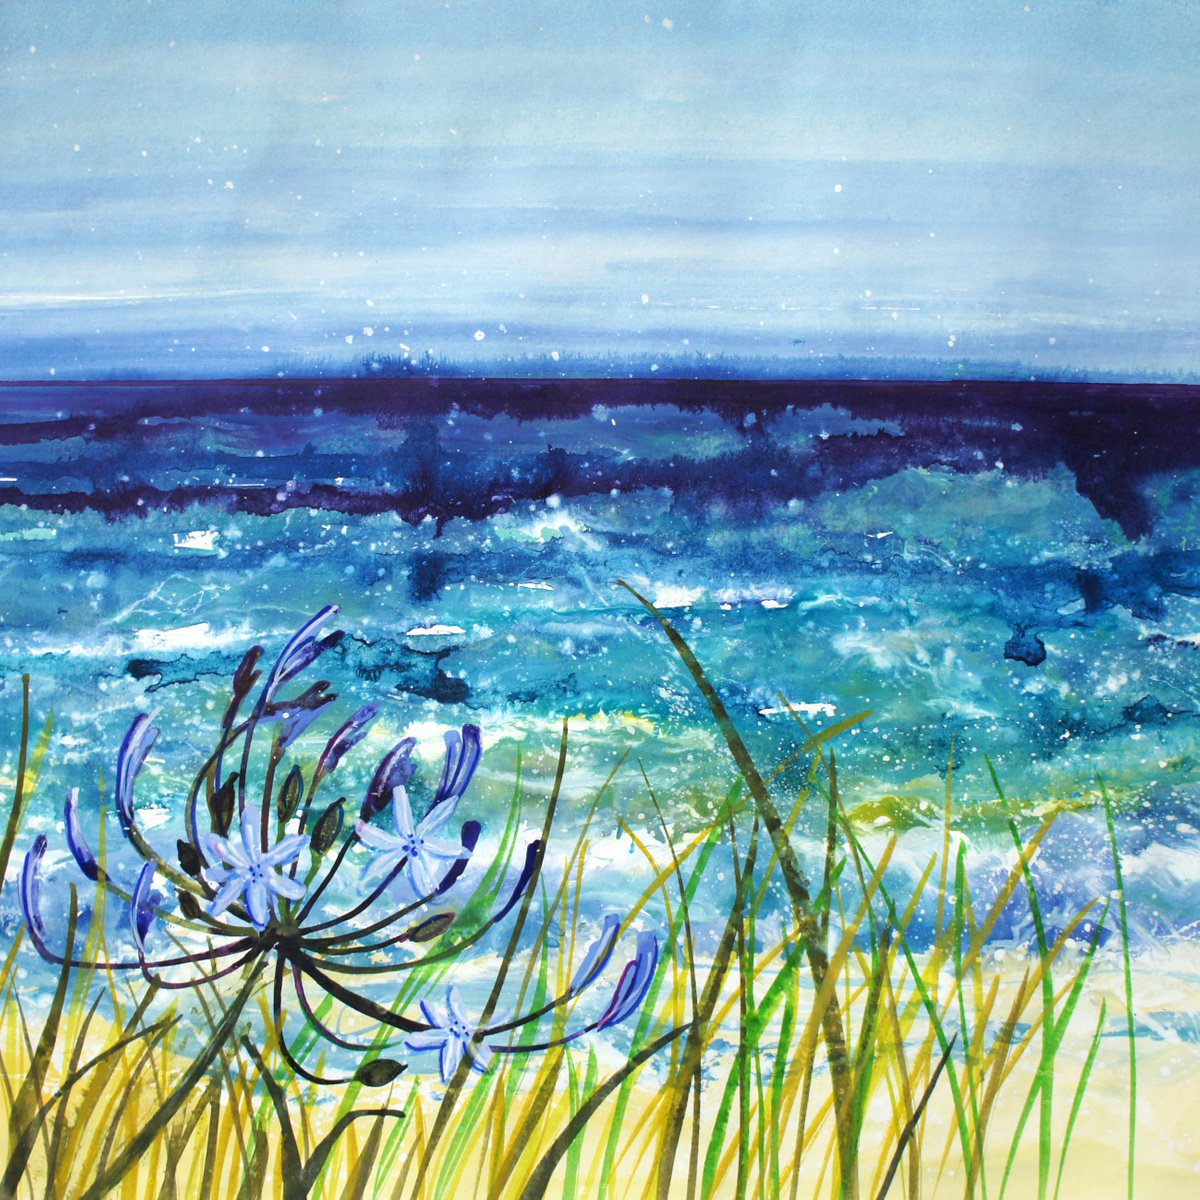 Agapanthus by the sea by Julia Rigby